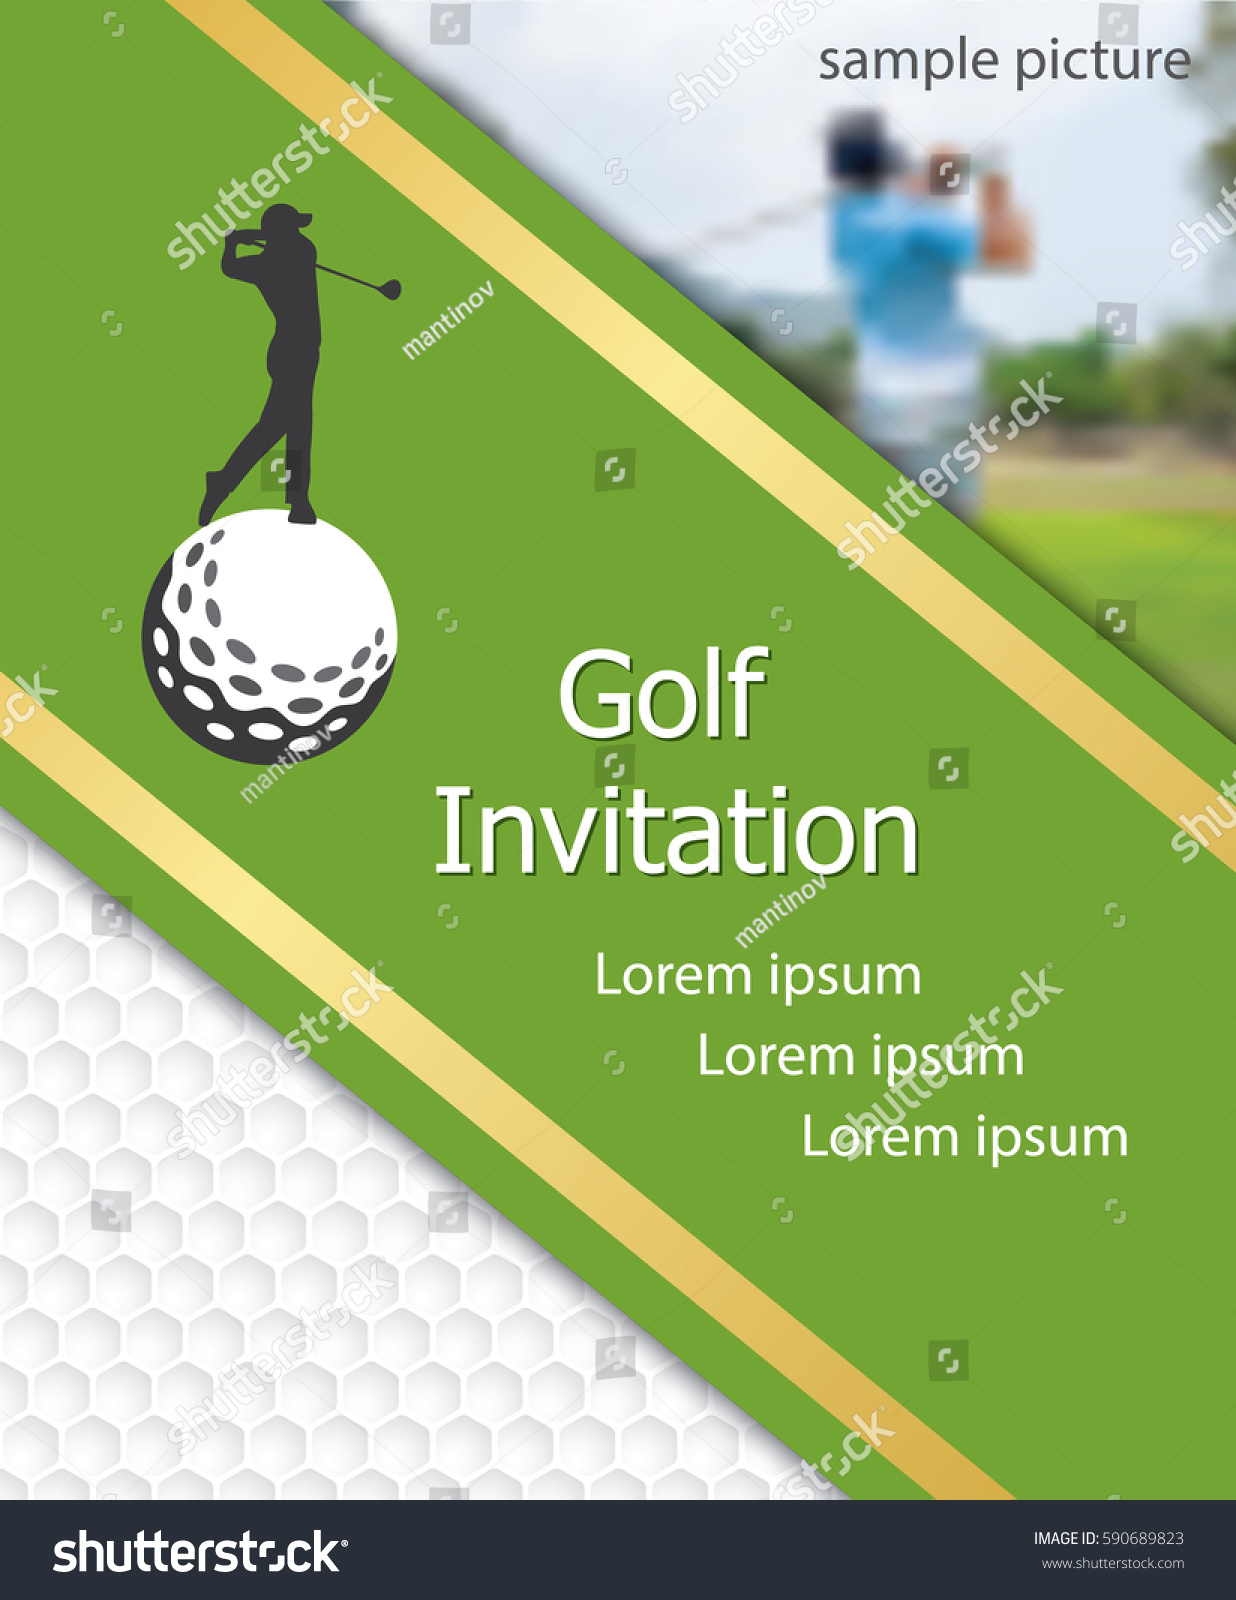 Golf Outing Brochure Template from image.shutterstock.com